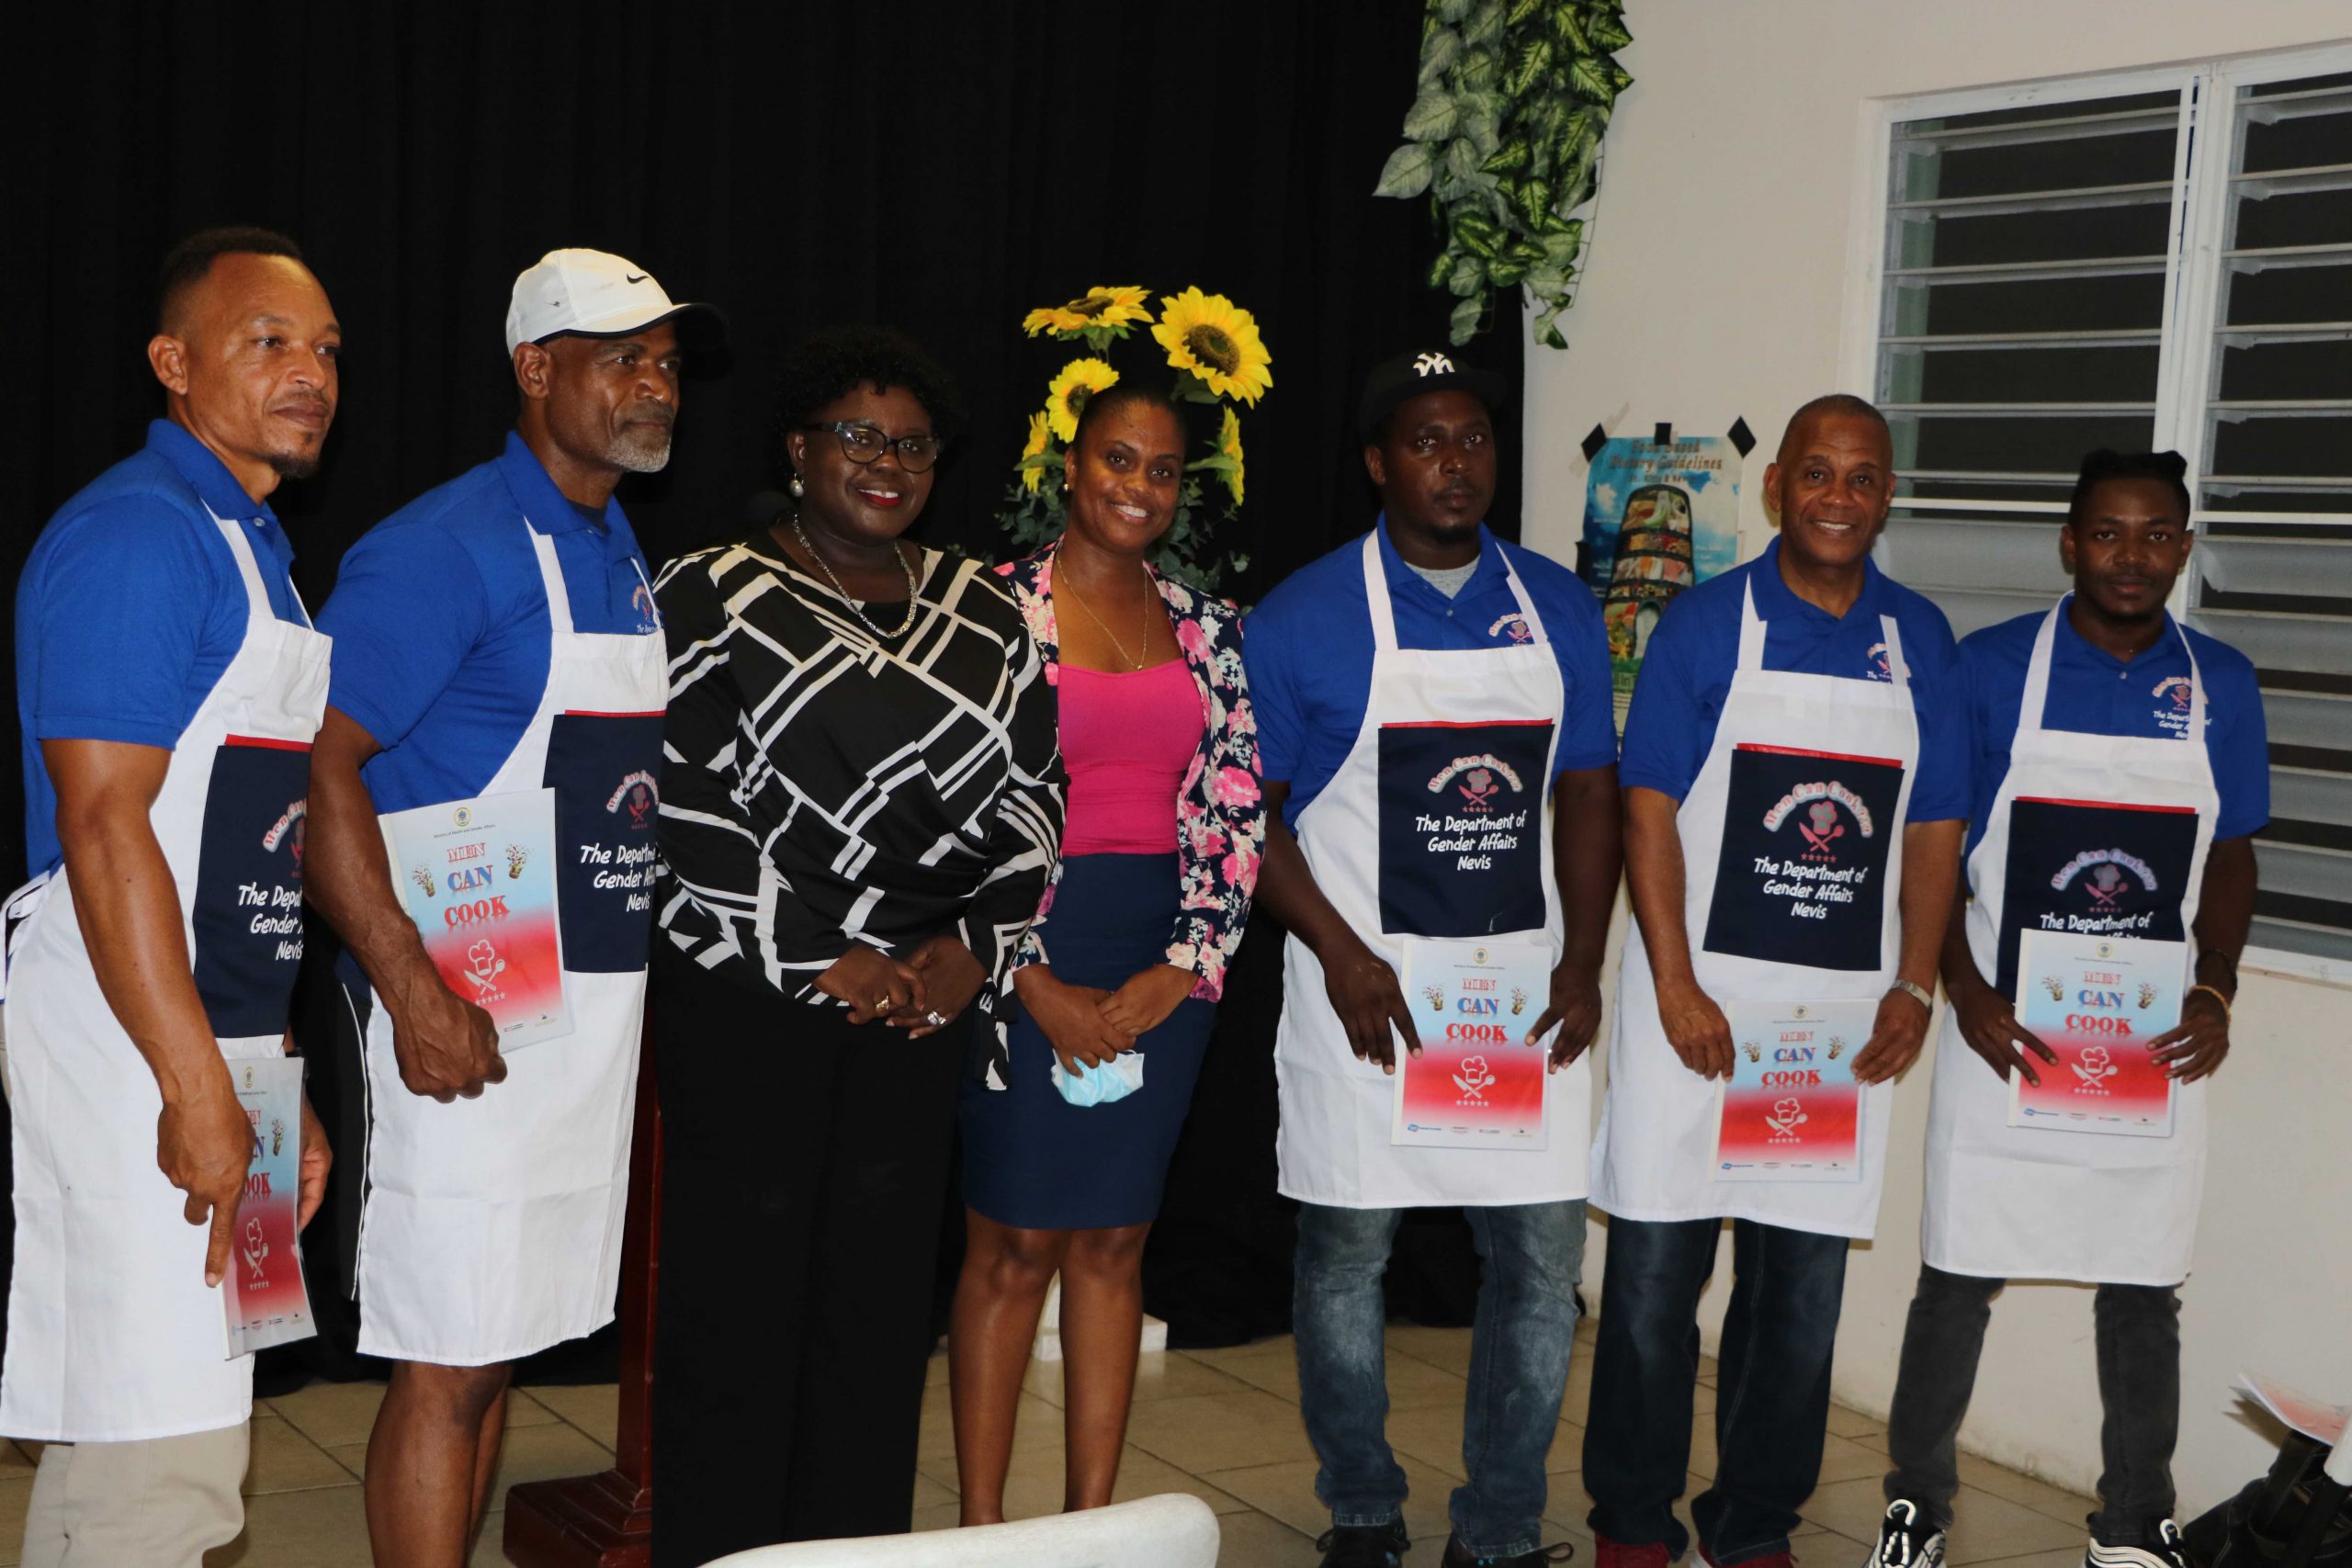 (l-r) Mr. Nedd Lestrade; Mr. David Walwyn; Hon. Hazel Brandy-Williams, Junior Minister of Health and Gender Affairs in the Nevis Island Administration; Ms. Latoya Jeffers, Assistant Permanent Secretary in the Ministry of Health and Gender Affairs; Mr. Kerwin Polius; Hon. Eric Evelyn, Minister of Community Development; and Mr. Chevaun Walwyn at the launch of the “Men Can Cook” programme at the Charlestown Primary School on November 16, 2020